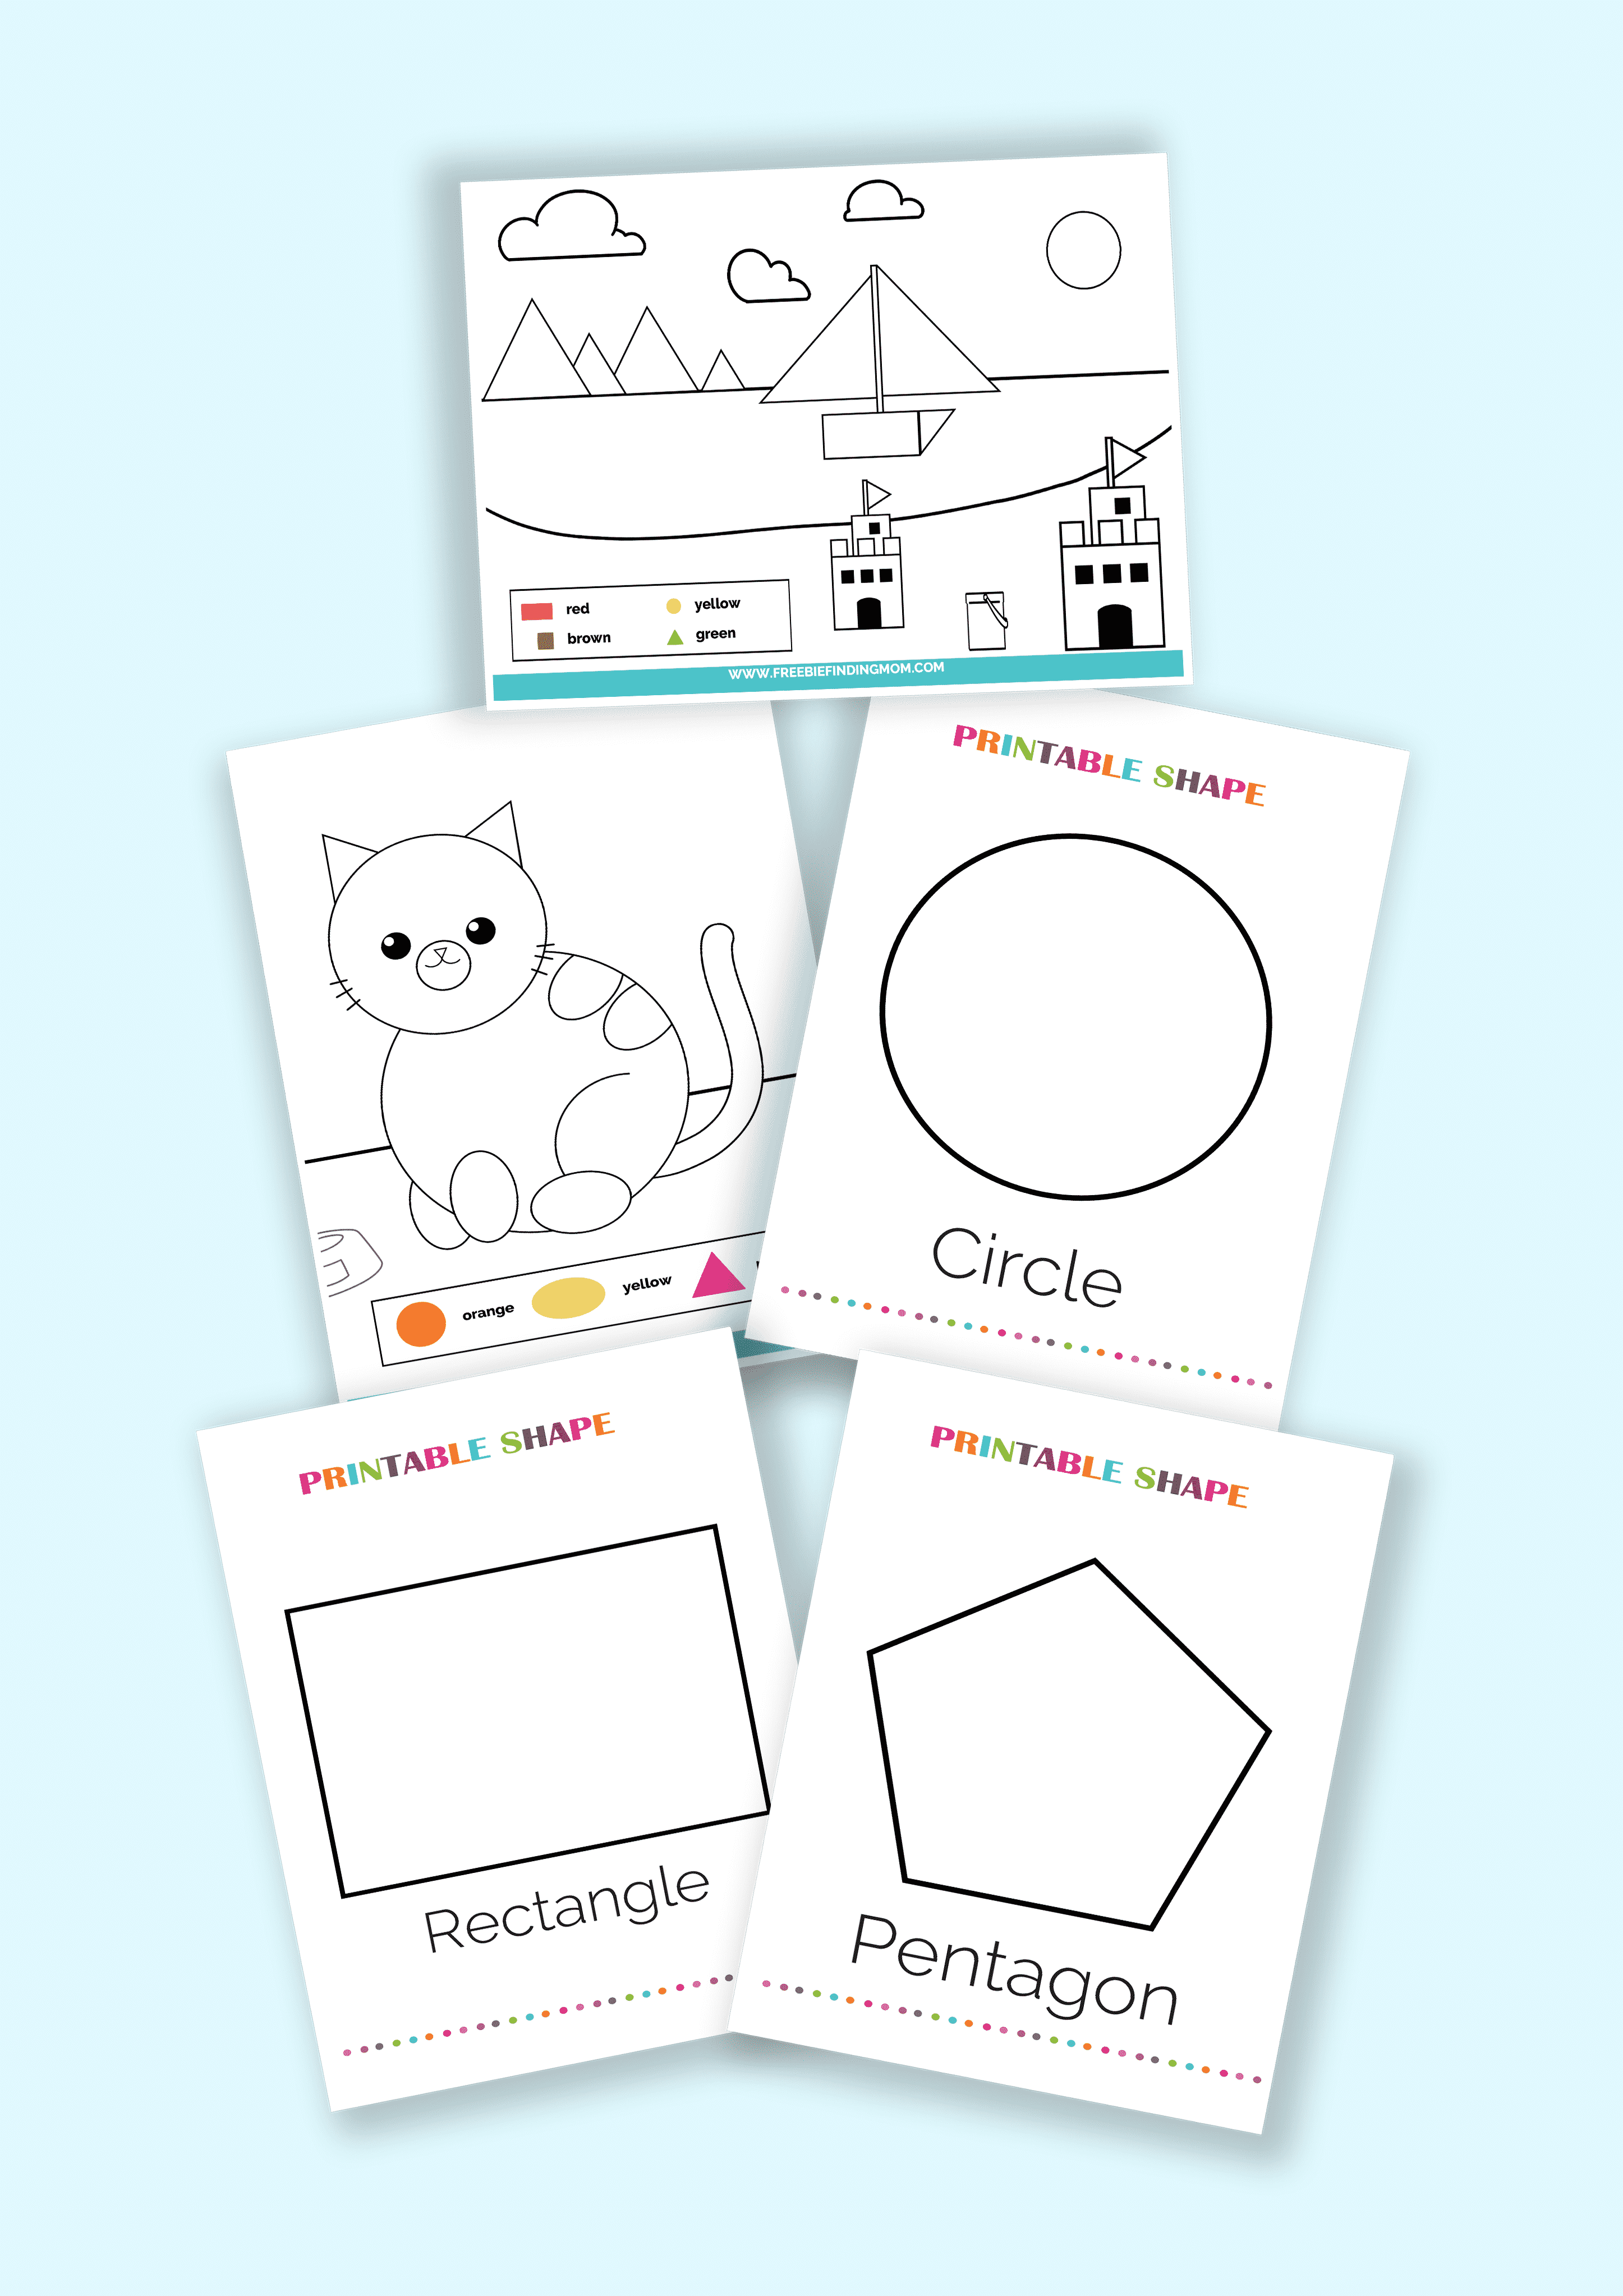 Printable shapes coloring pages pdfs